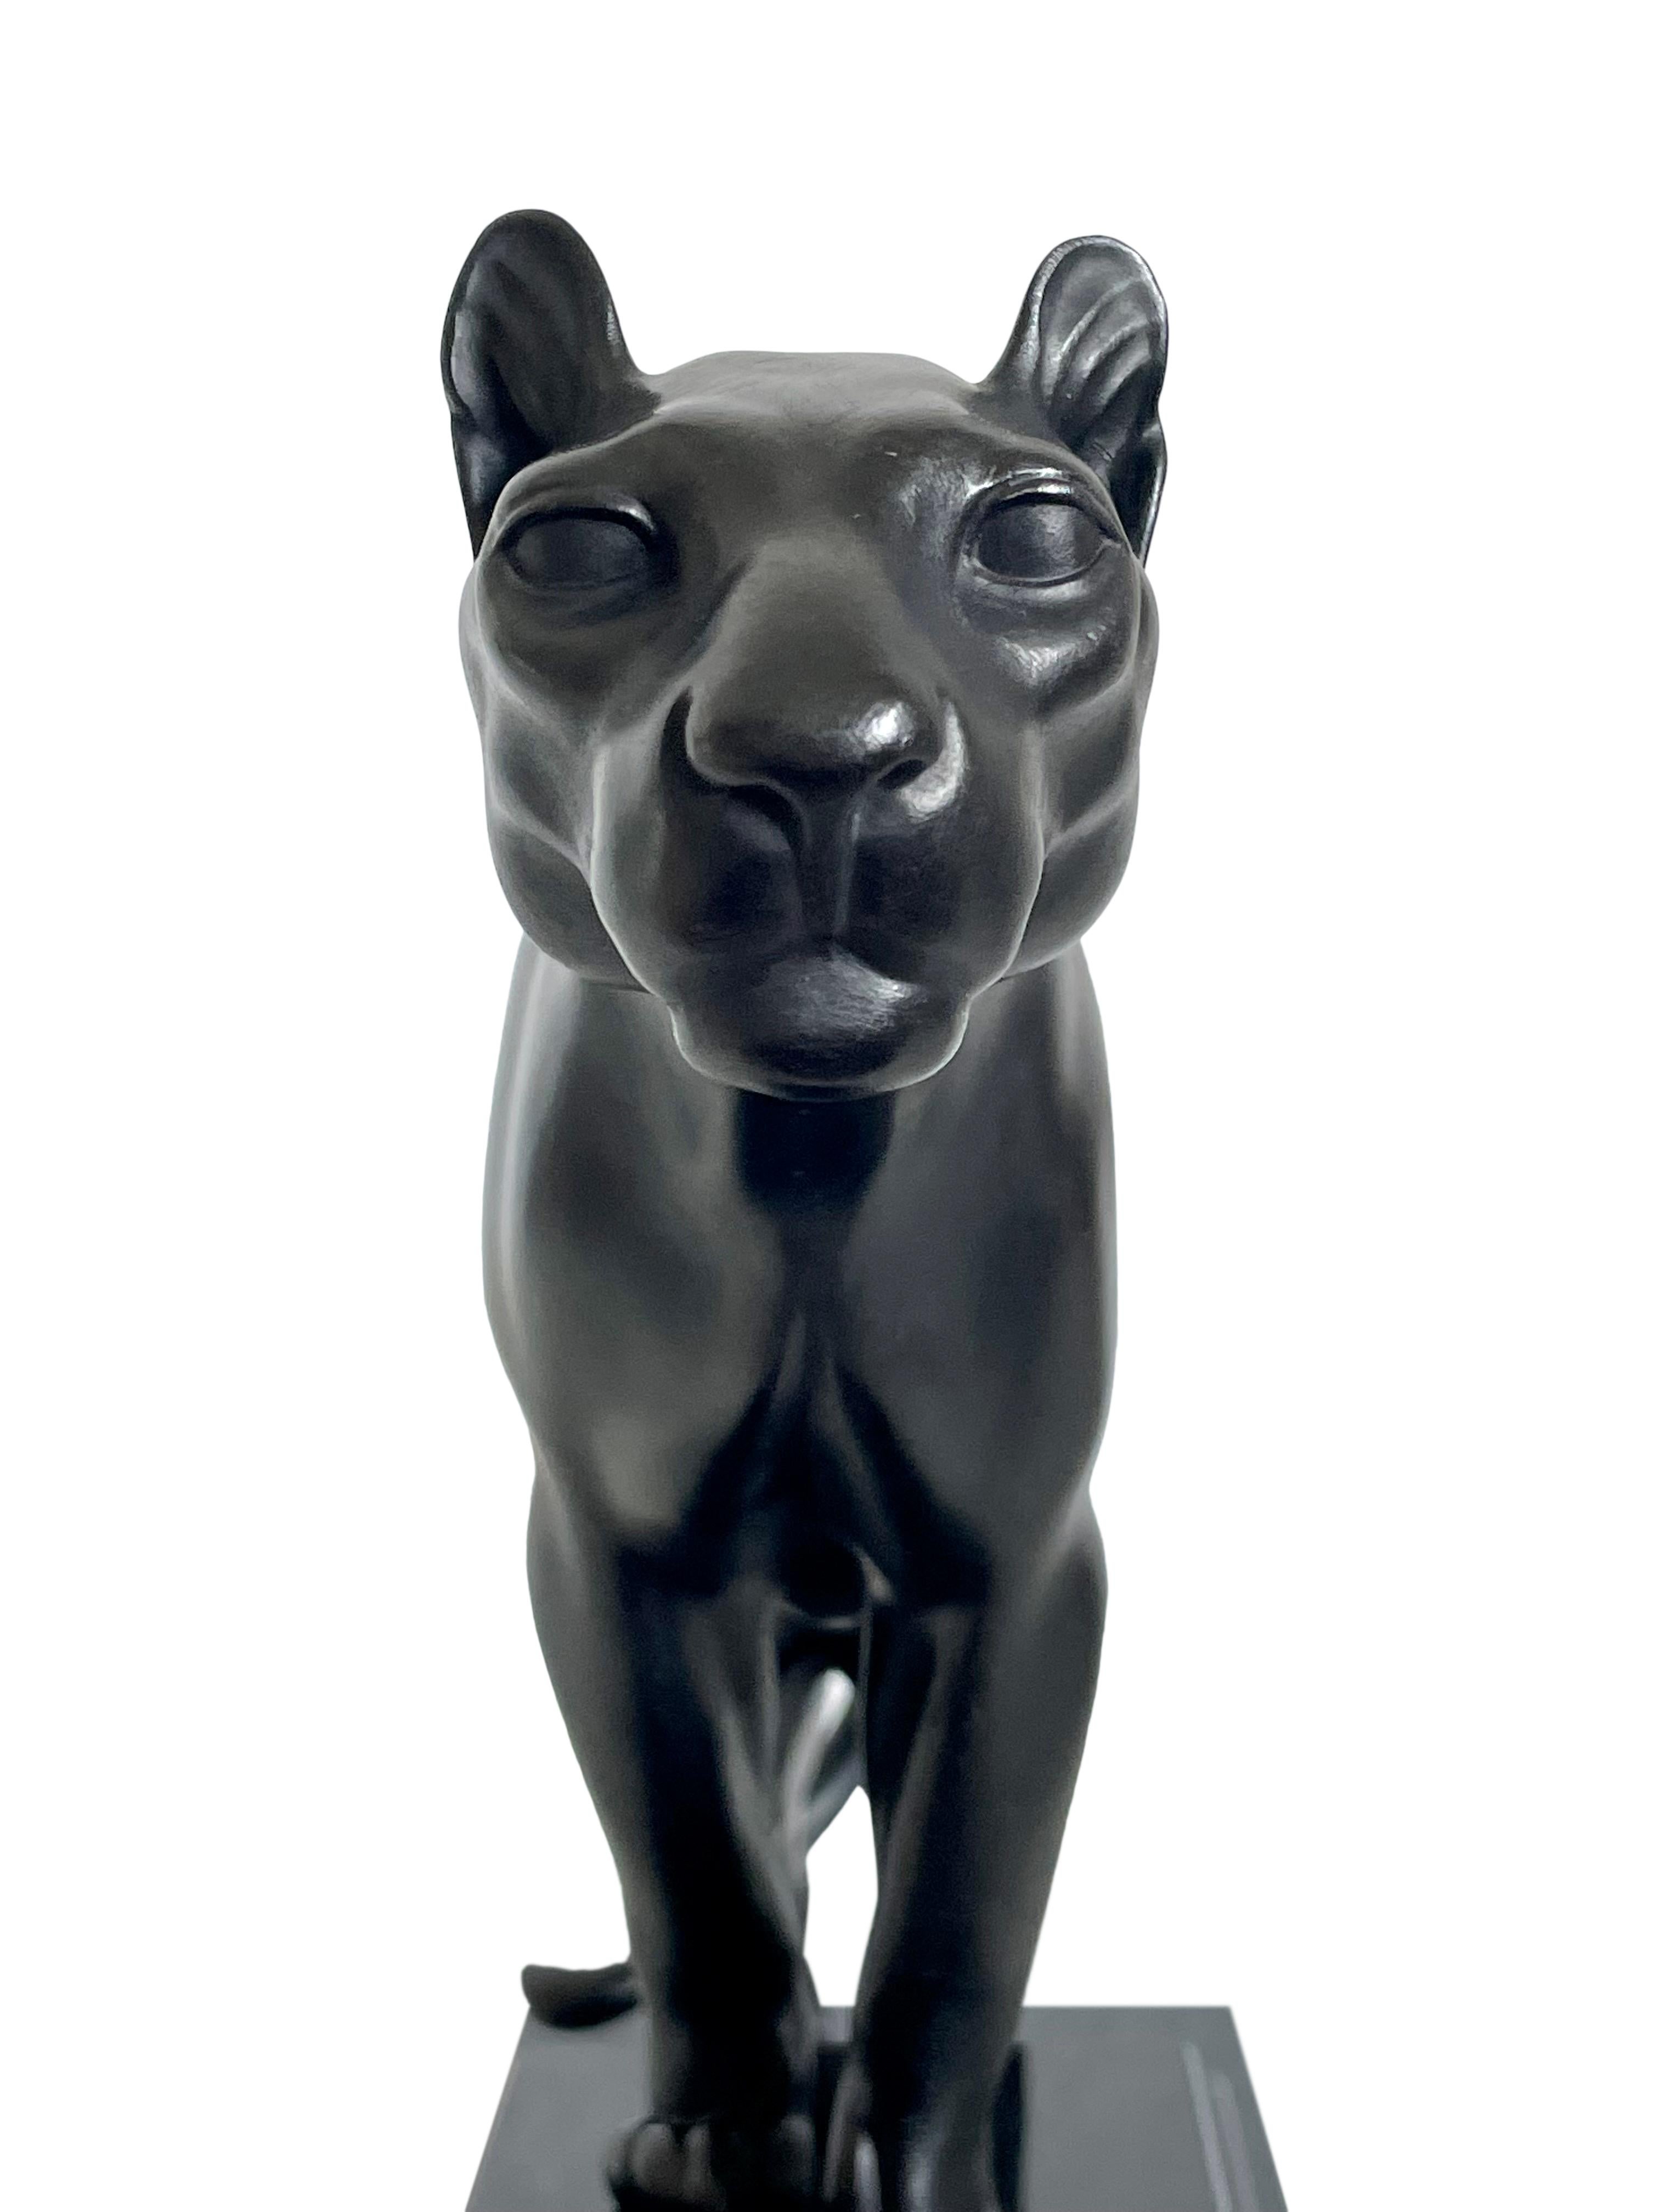 Art Deco Black Panther Sculpture by Max Le Verrier on a Stepped Marble Base